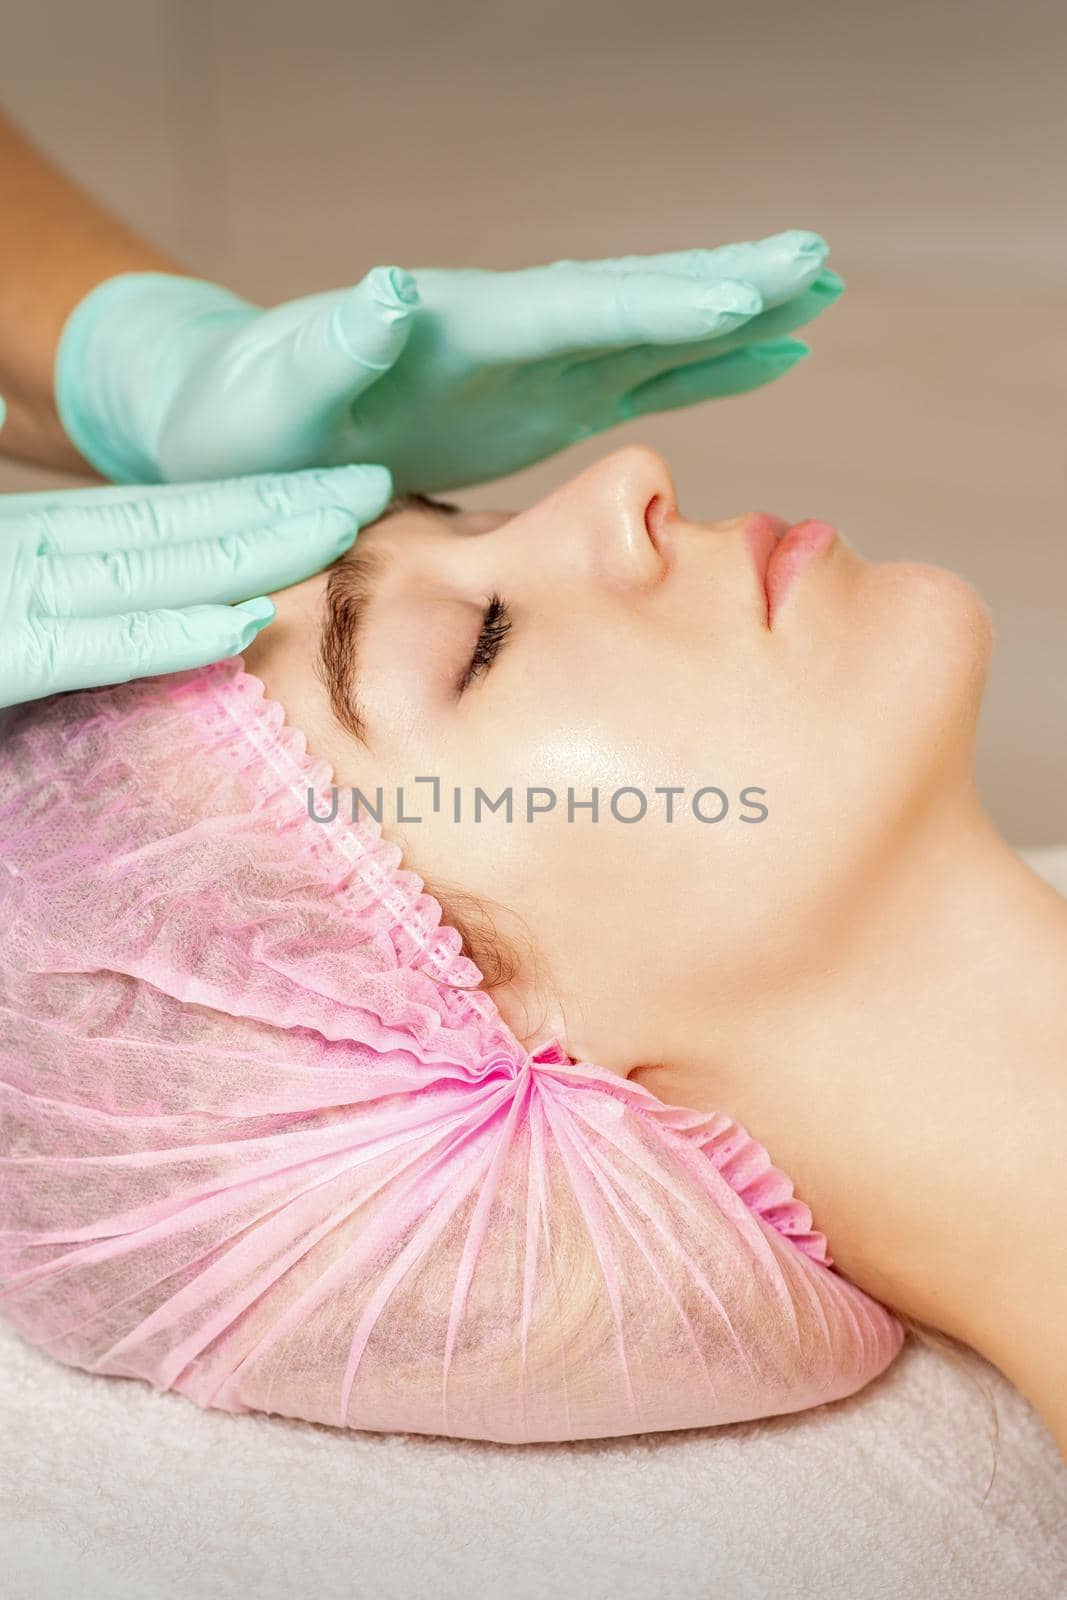 The woman is having cosmetic treatment during cosmetologist in medical gloves are touching the female face at the spa salon